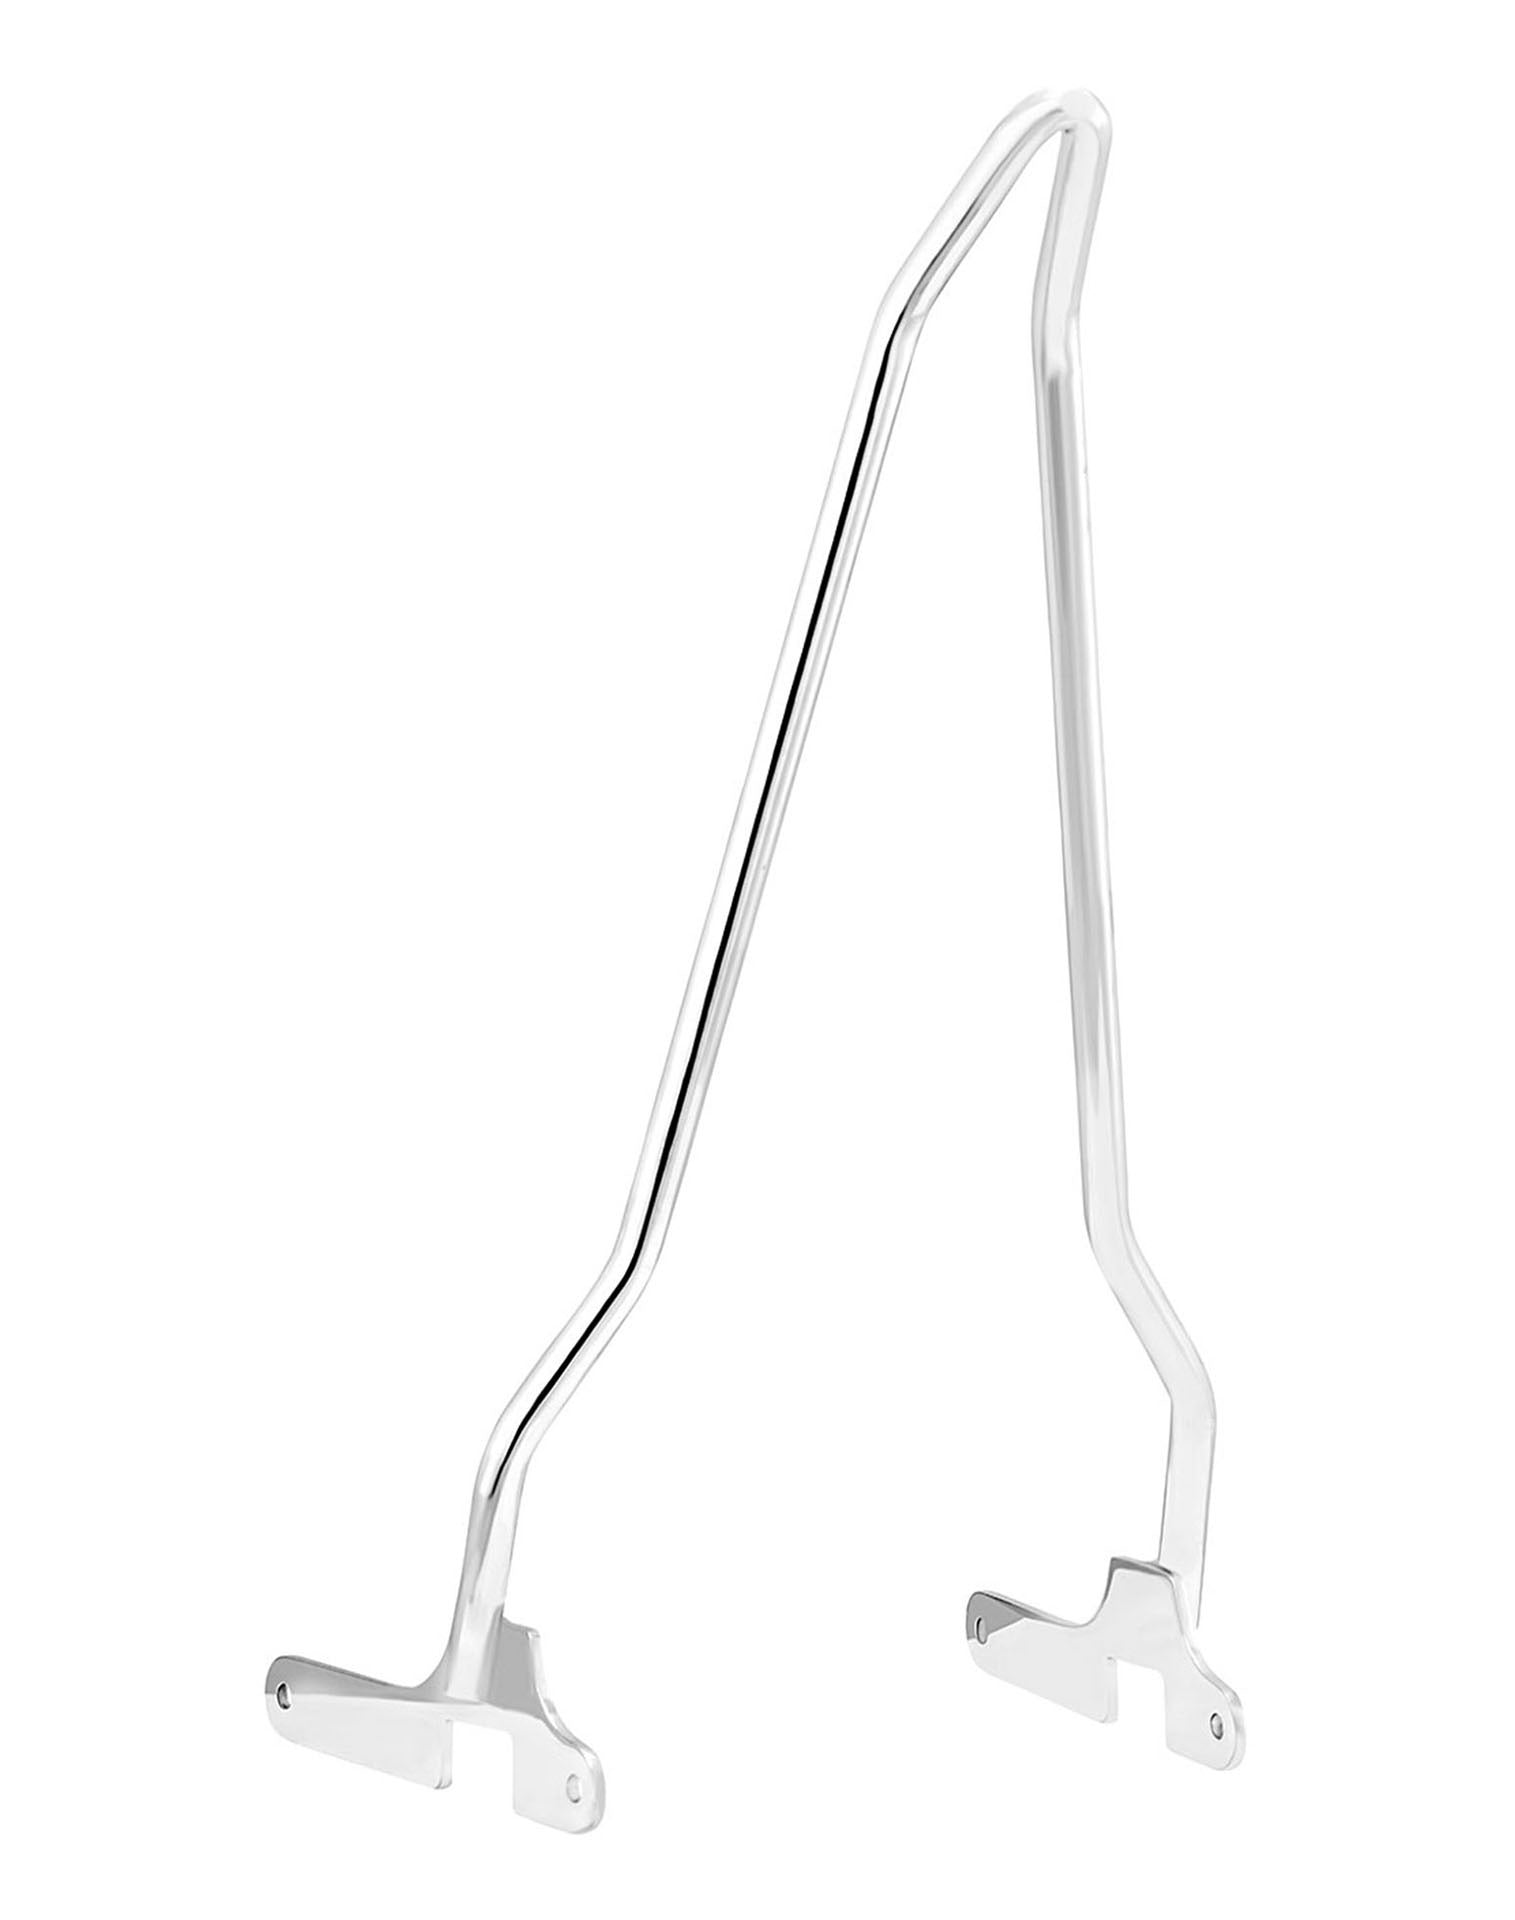 Iron Born Blade 25" Sissy Bar for Harley Sportster 1200 Low XL1200L Chrome Portrait View